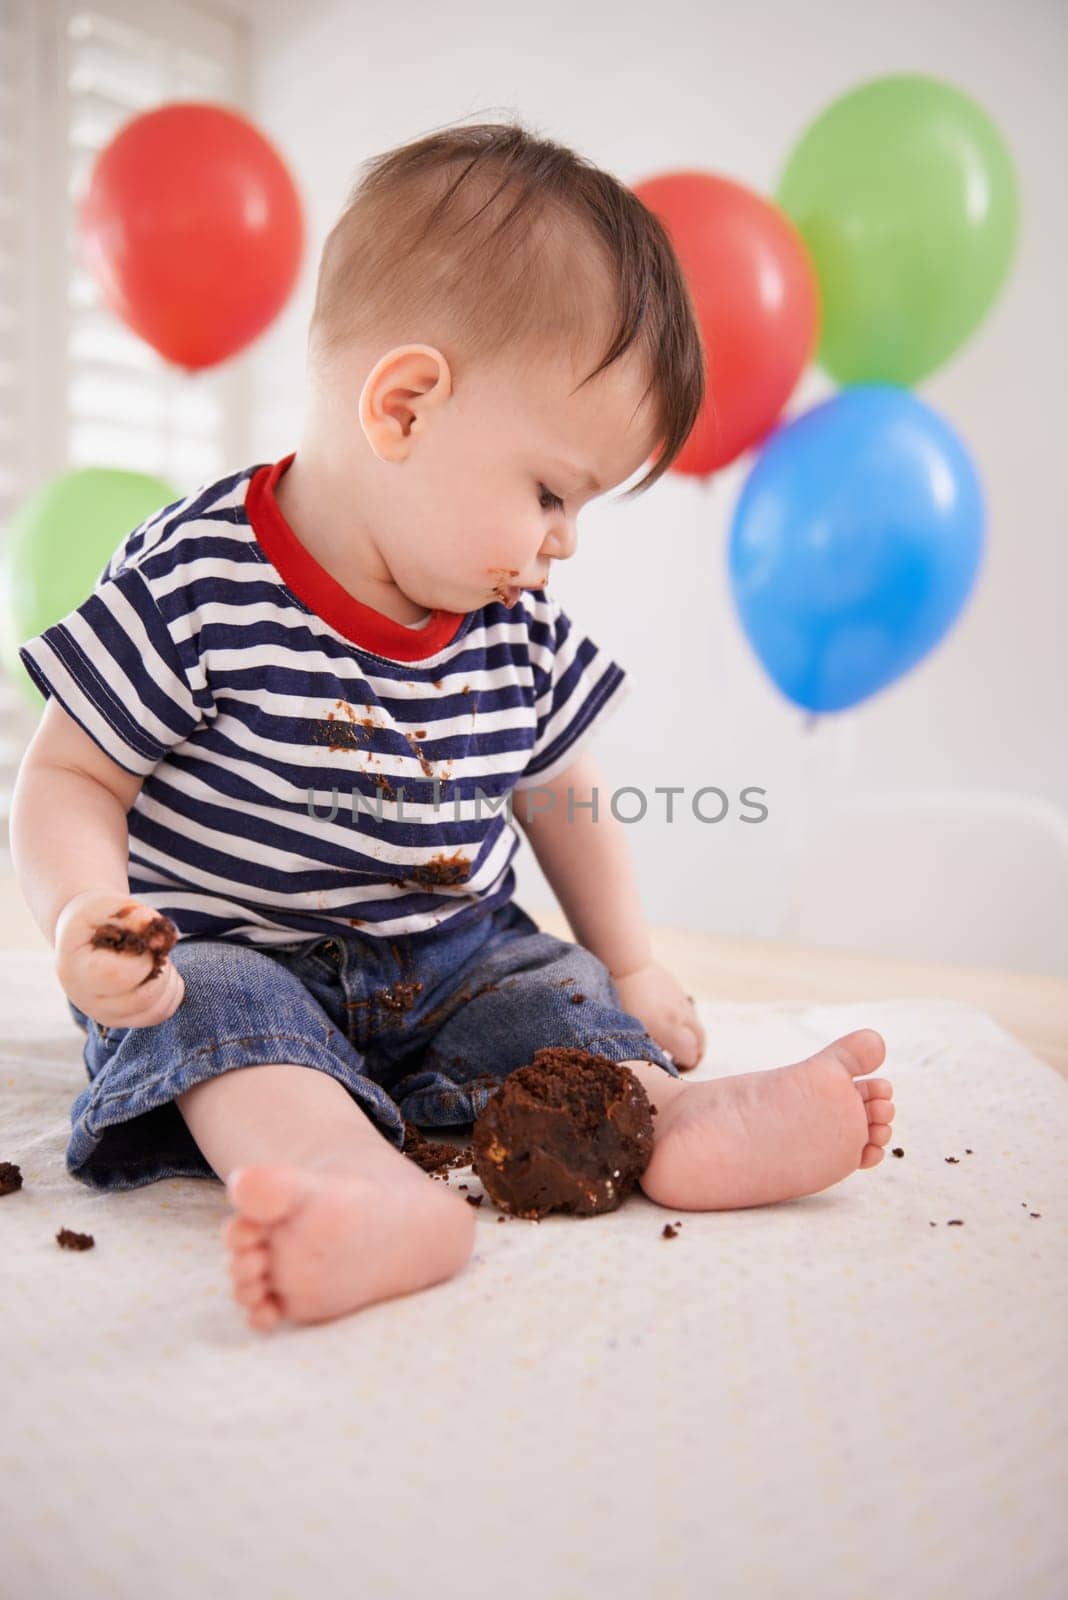 Baby, birthday party and cake or mess eating by balloons or celebrating special day with dessert candy, sweets or event. Childhood, playing and dirty in home with snack or weekend, surprise or hungry.